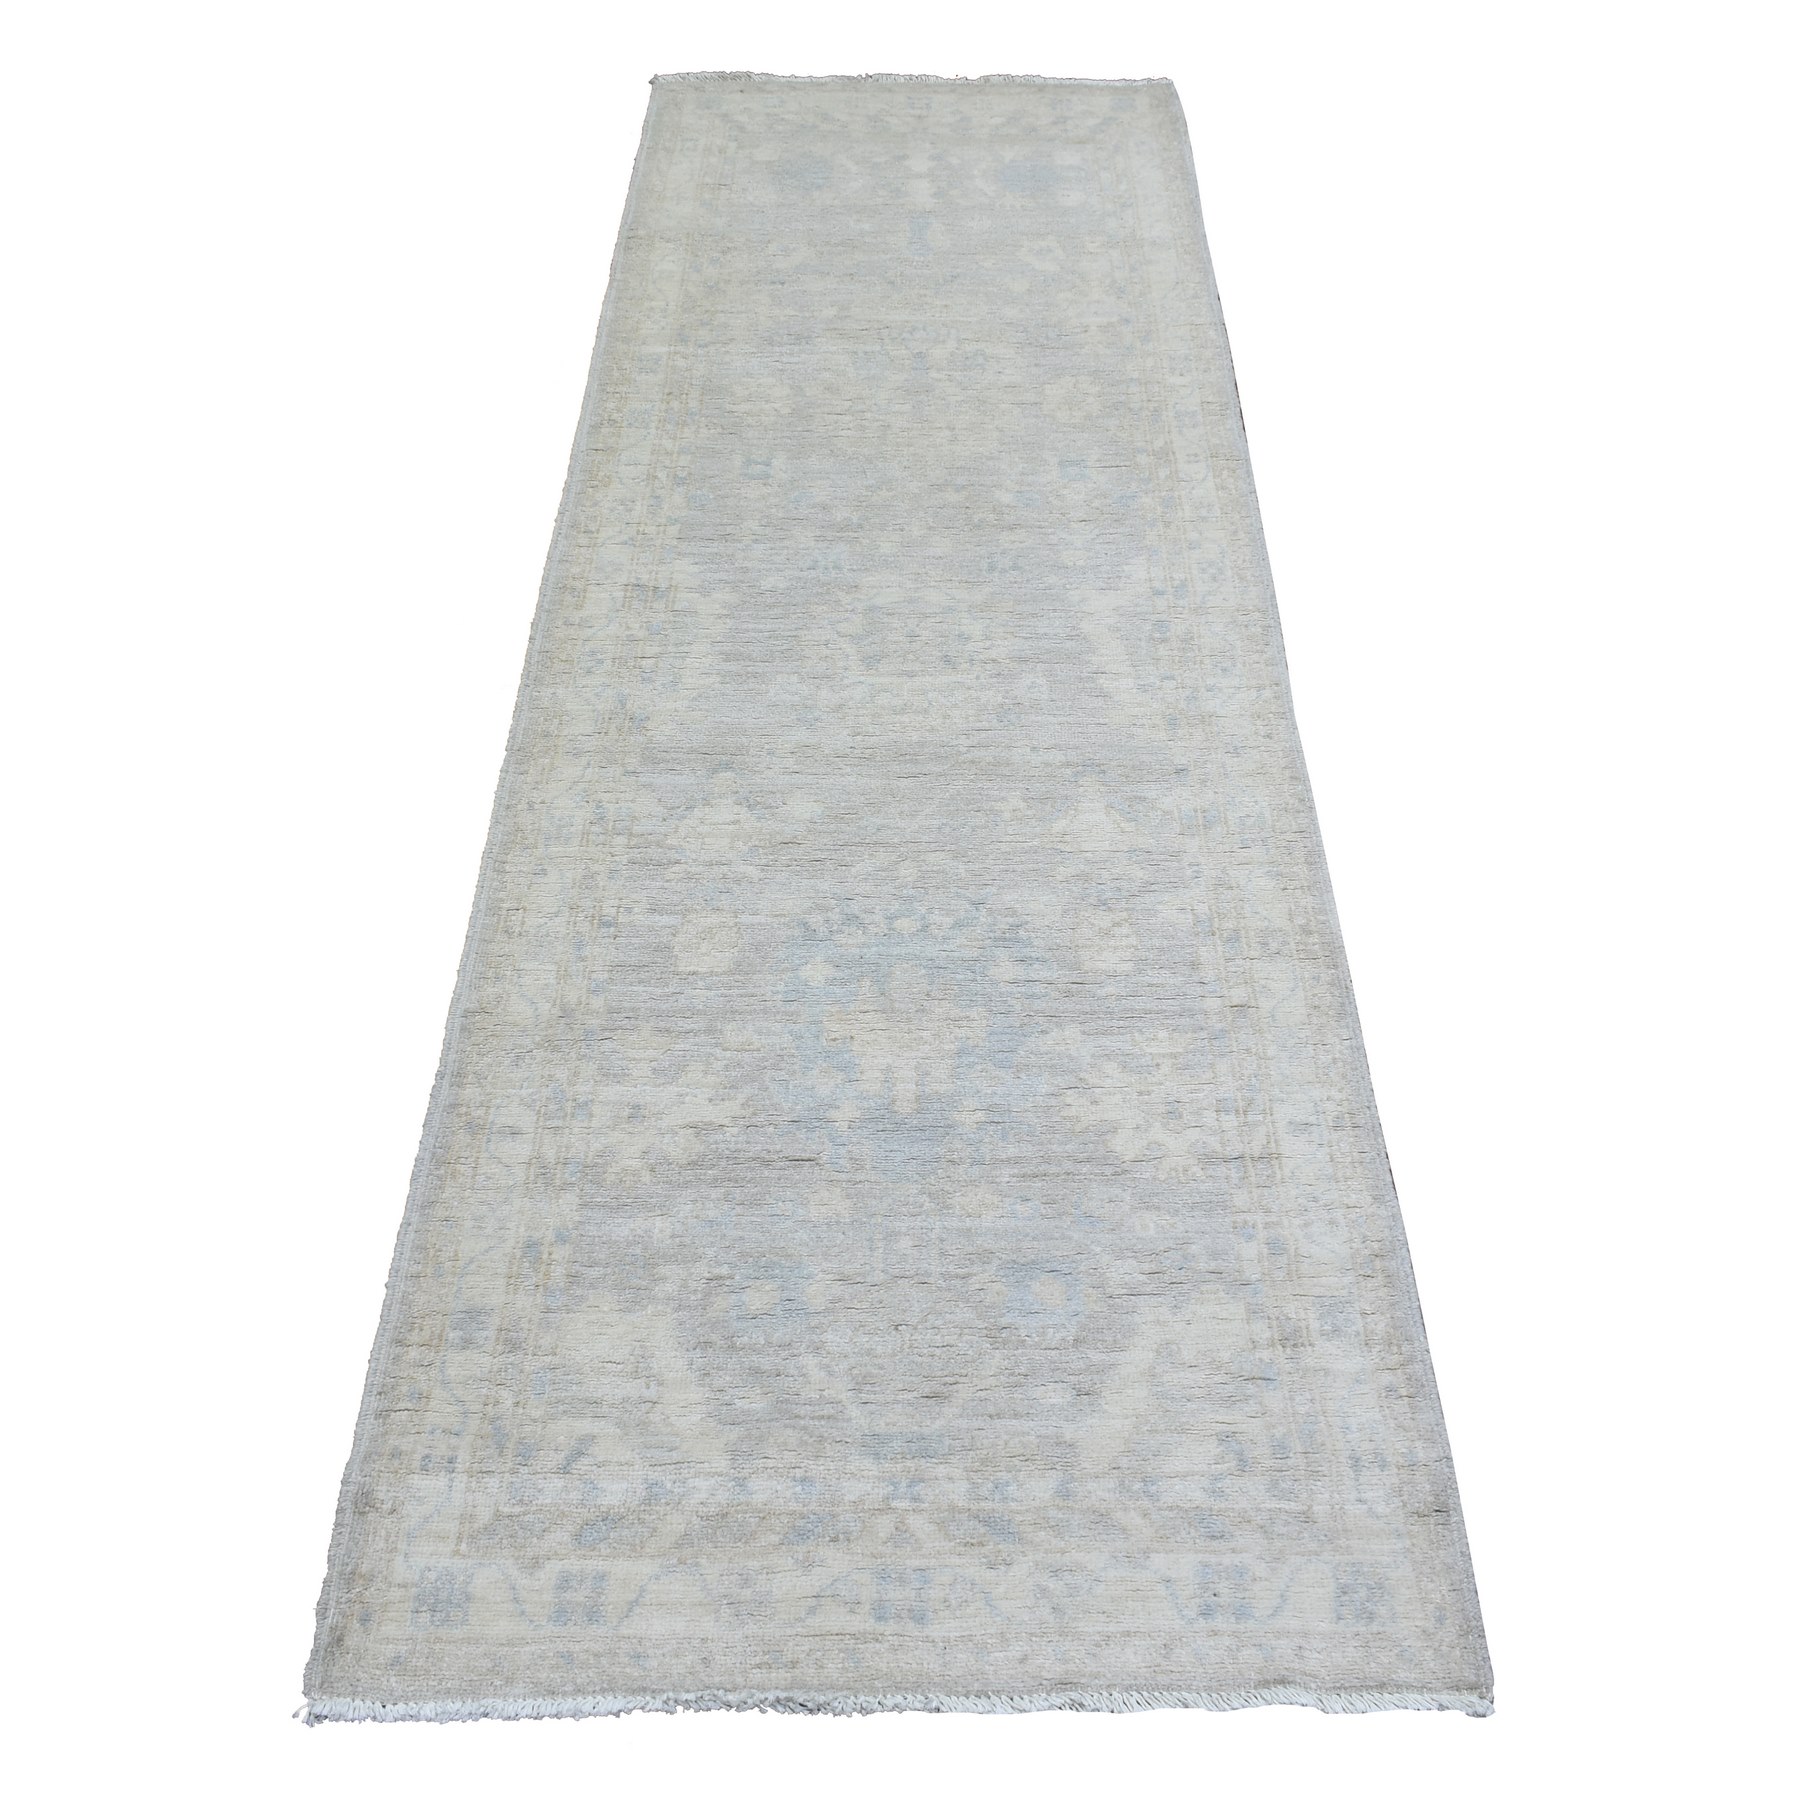 2'6"x7'9" Light Gray, Hand Woven White Wash Peshawar with All Over Design, Natural Dyes Soft Organic Wool, Runner Oriental Rug 